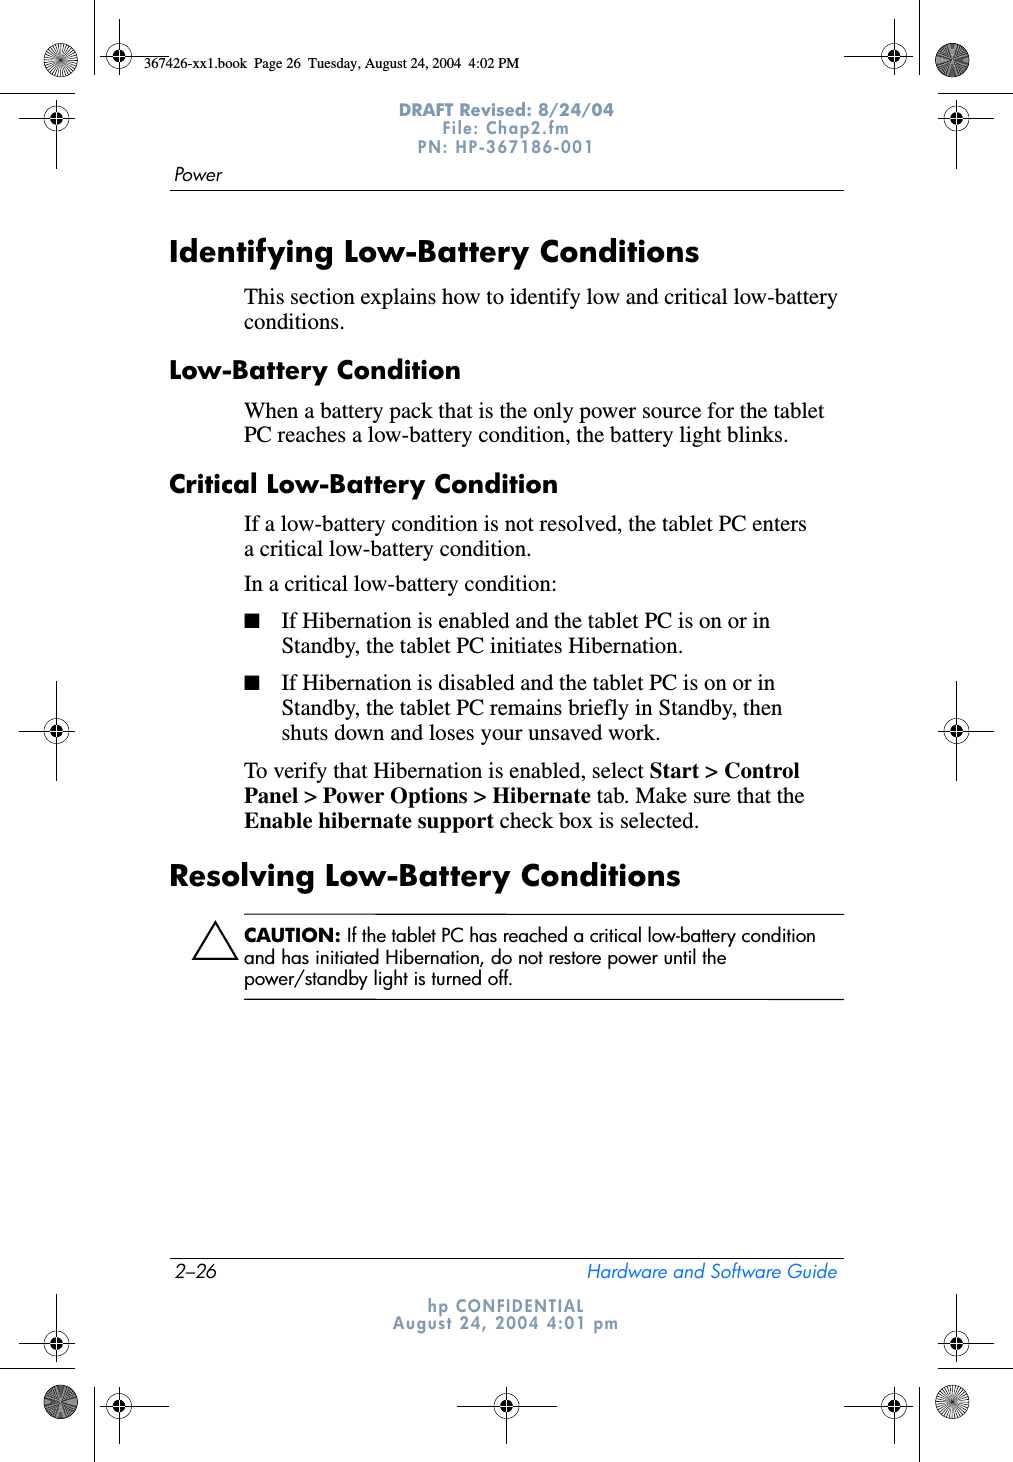 2–26 Hardware and Software GuidePowerDRAFT Revised: 8/24/04File: Chap2.fm PN: HP-367186-001 hp CONFIDENTIALAugust 24, 2004 4:01 pmIdentifying Low-Battery ConditionsThis section explains how to identify low and critical low-battery conditions.Low-Battery ConditionWhen a battery pack that is the only power source for the tablet PC reaches a low-battery condition, the battery light blinks.Critical Low-Battery ConditionIf a low-battery condition is not resolved, the tablet PC enters a critical low-battery condition.In a critical low-battery condition:■If Hibernation is enabled and the tablet PC is on or in Standby, the tablet PC initiates Hibernation.■If Hibernation is disabled and the tablet PC is on or in Standby, the tablet PC remains briefly in Standby, then shuts down and loses your unsaved work.To verify that Hibernation is enabled, select Start &gt; Control Panel &gt; Power Options &gt; Hibernate tab. Make sure that the Enable hibernate support check box is selected.Resolving Low-Battery ConditionsÄCAUTION: If the tablet PC has reached a critical low-battery condition and has initiated Hibernation, do not restore power until the power/standby light is turned off.367426-xx1.book  Page 26  Tuesday, August 24, 2004  4:02 PM